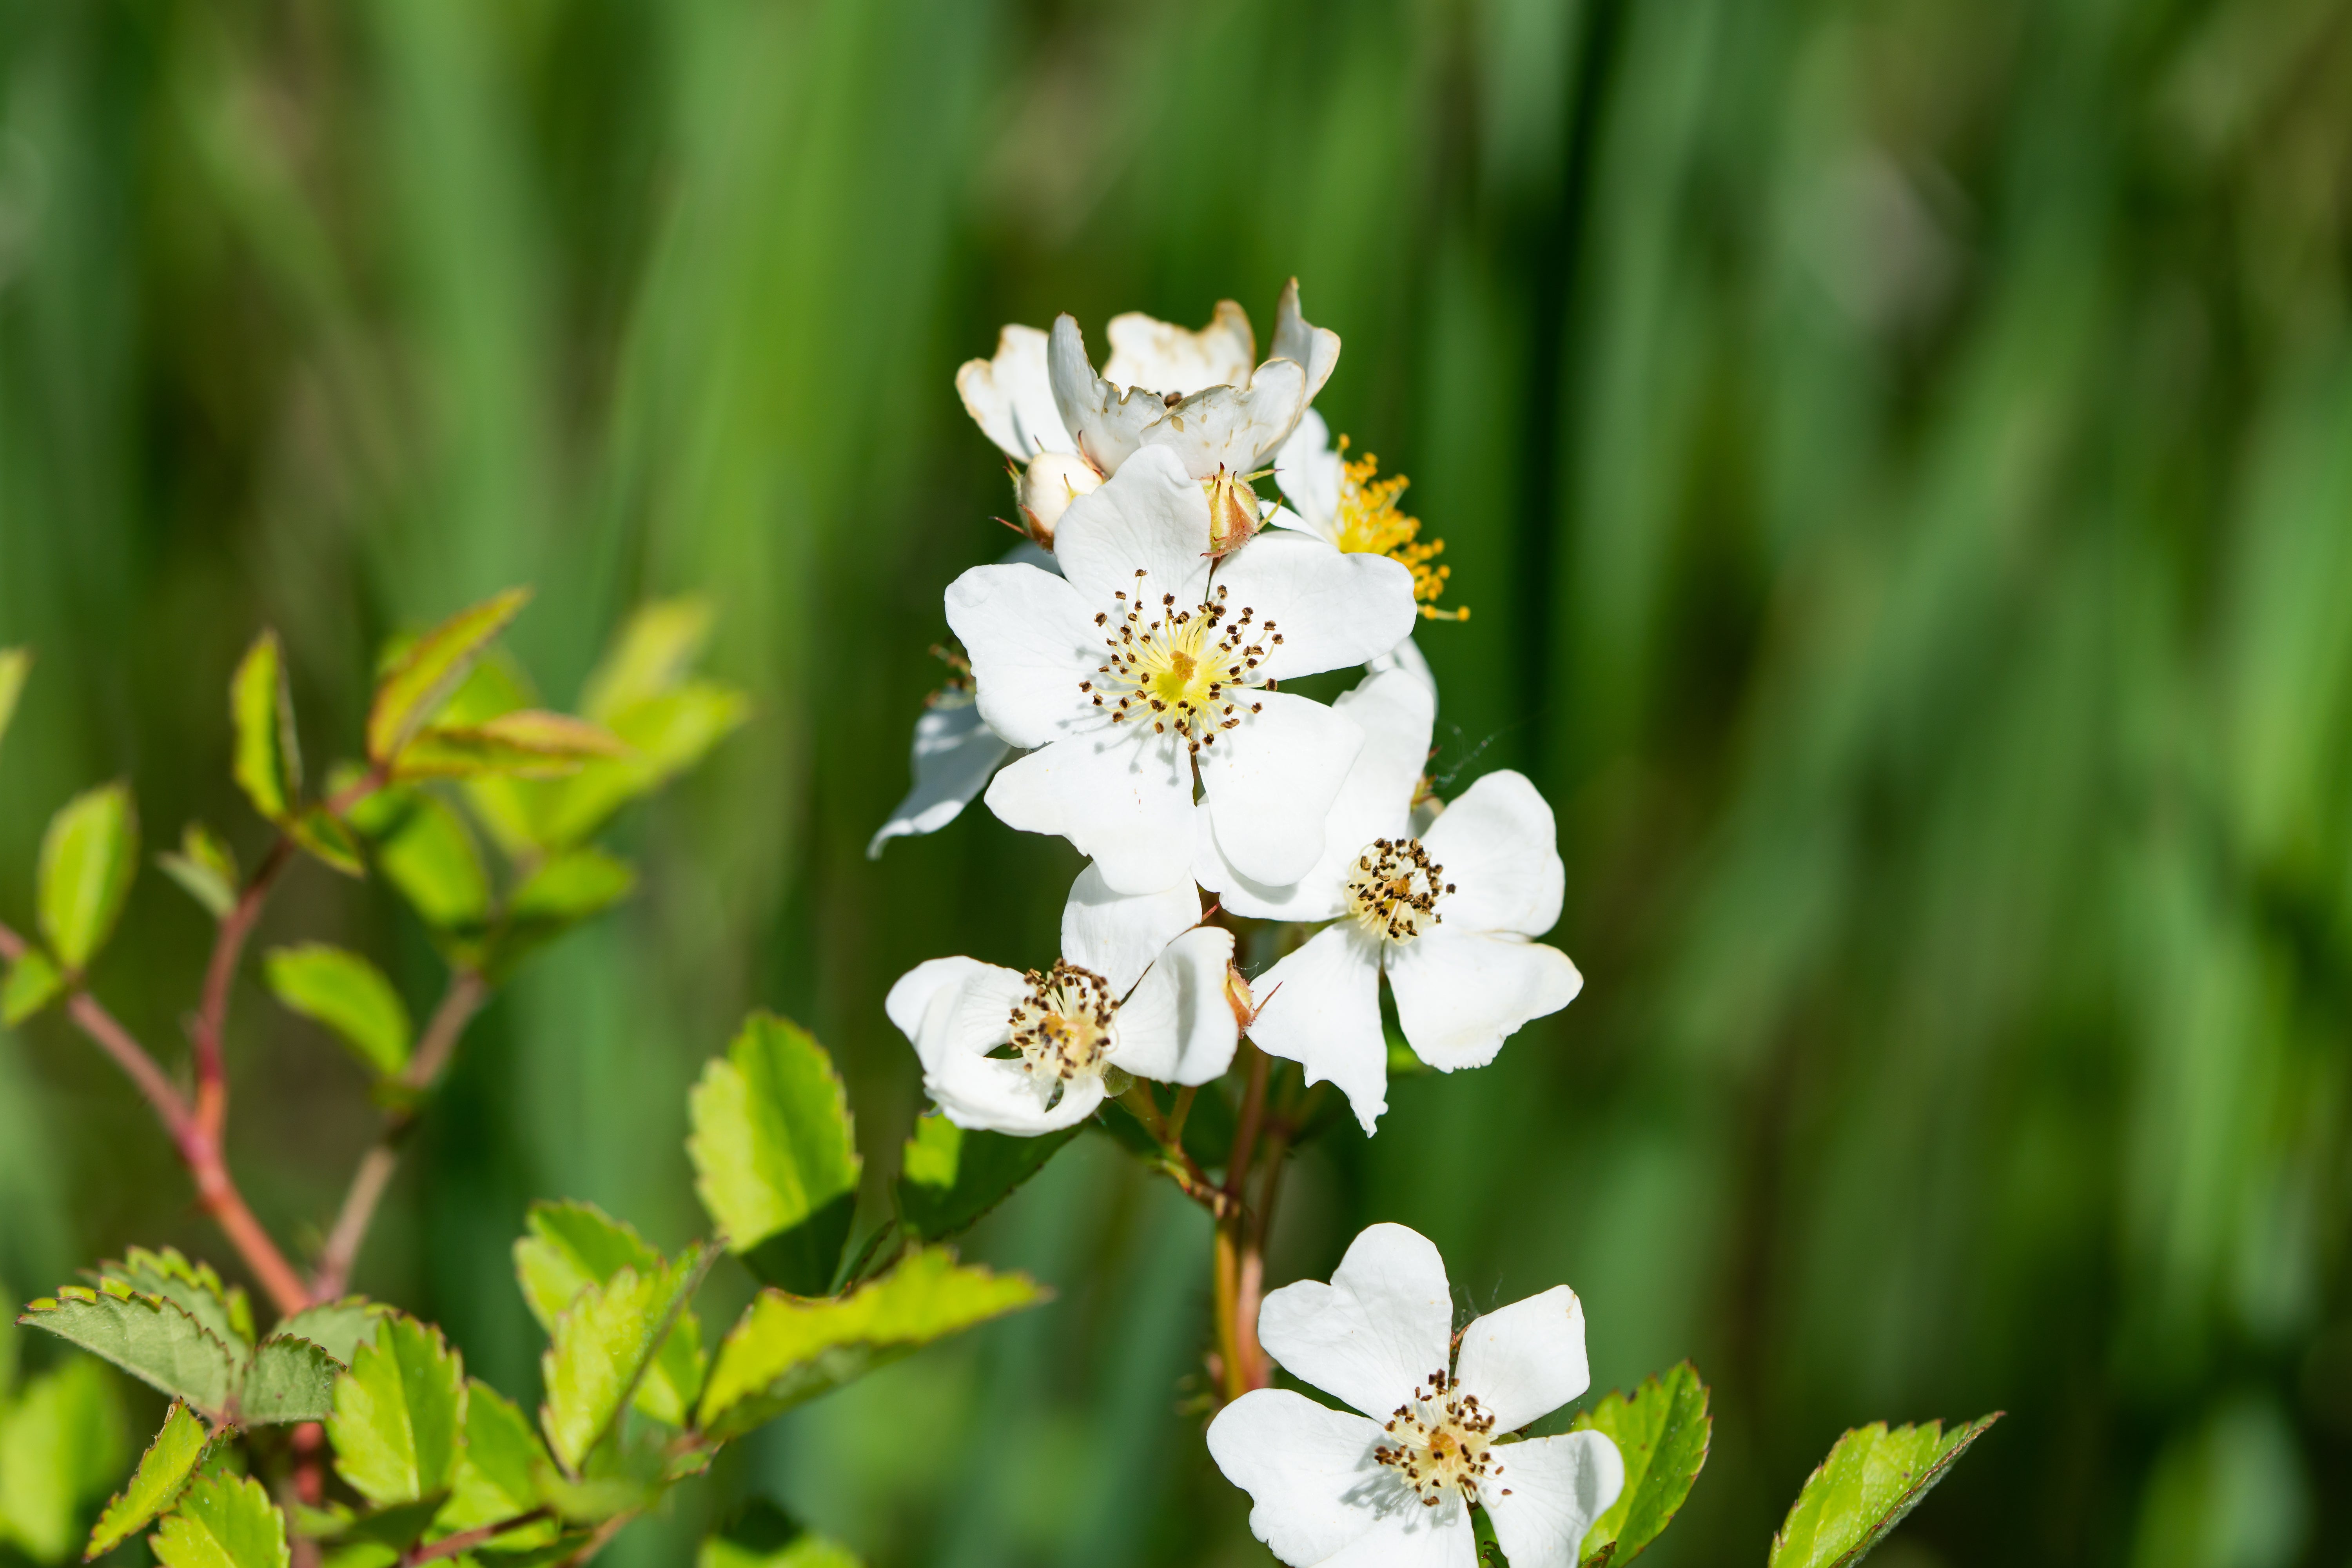 The multiflora rose, a flowery shrub, has spread across the US after being introduced to prevent erosion